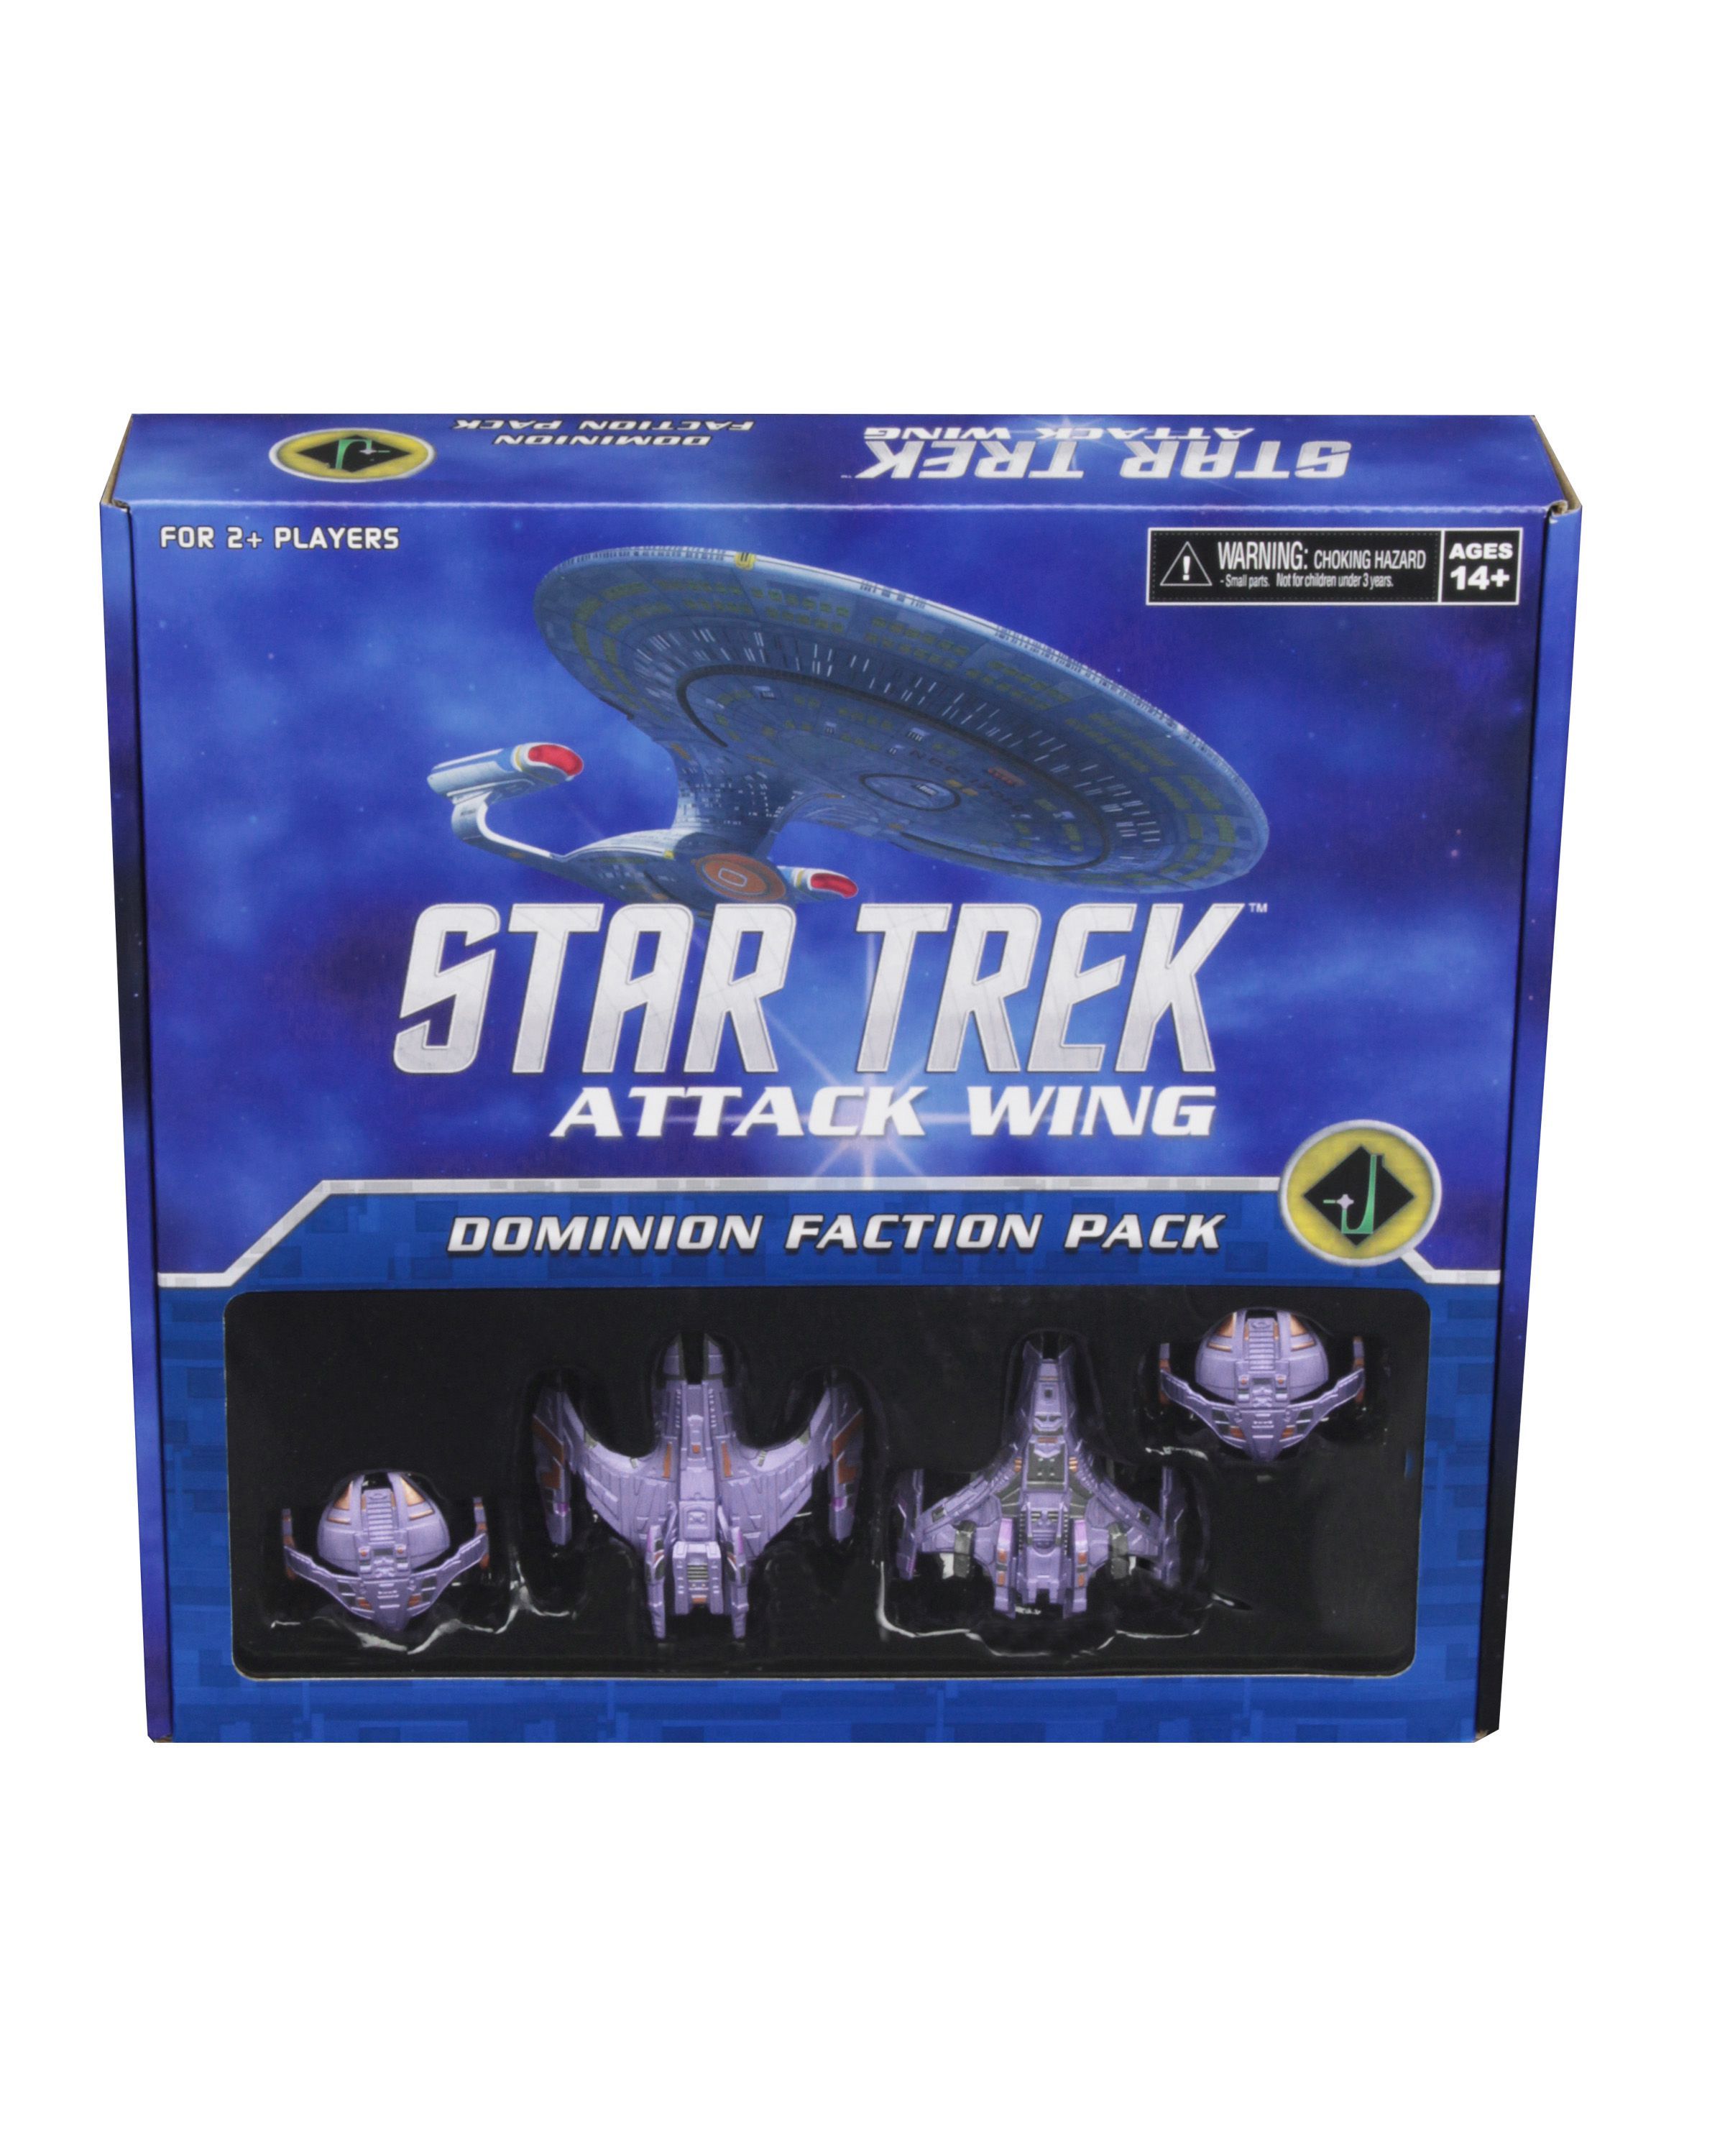 Star Trek: Attack Wing – Dominion Faction Pack